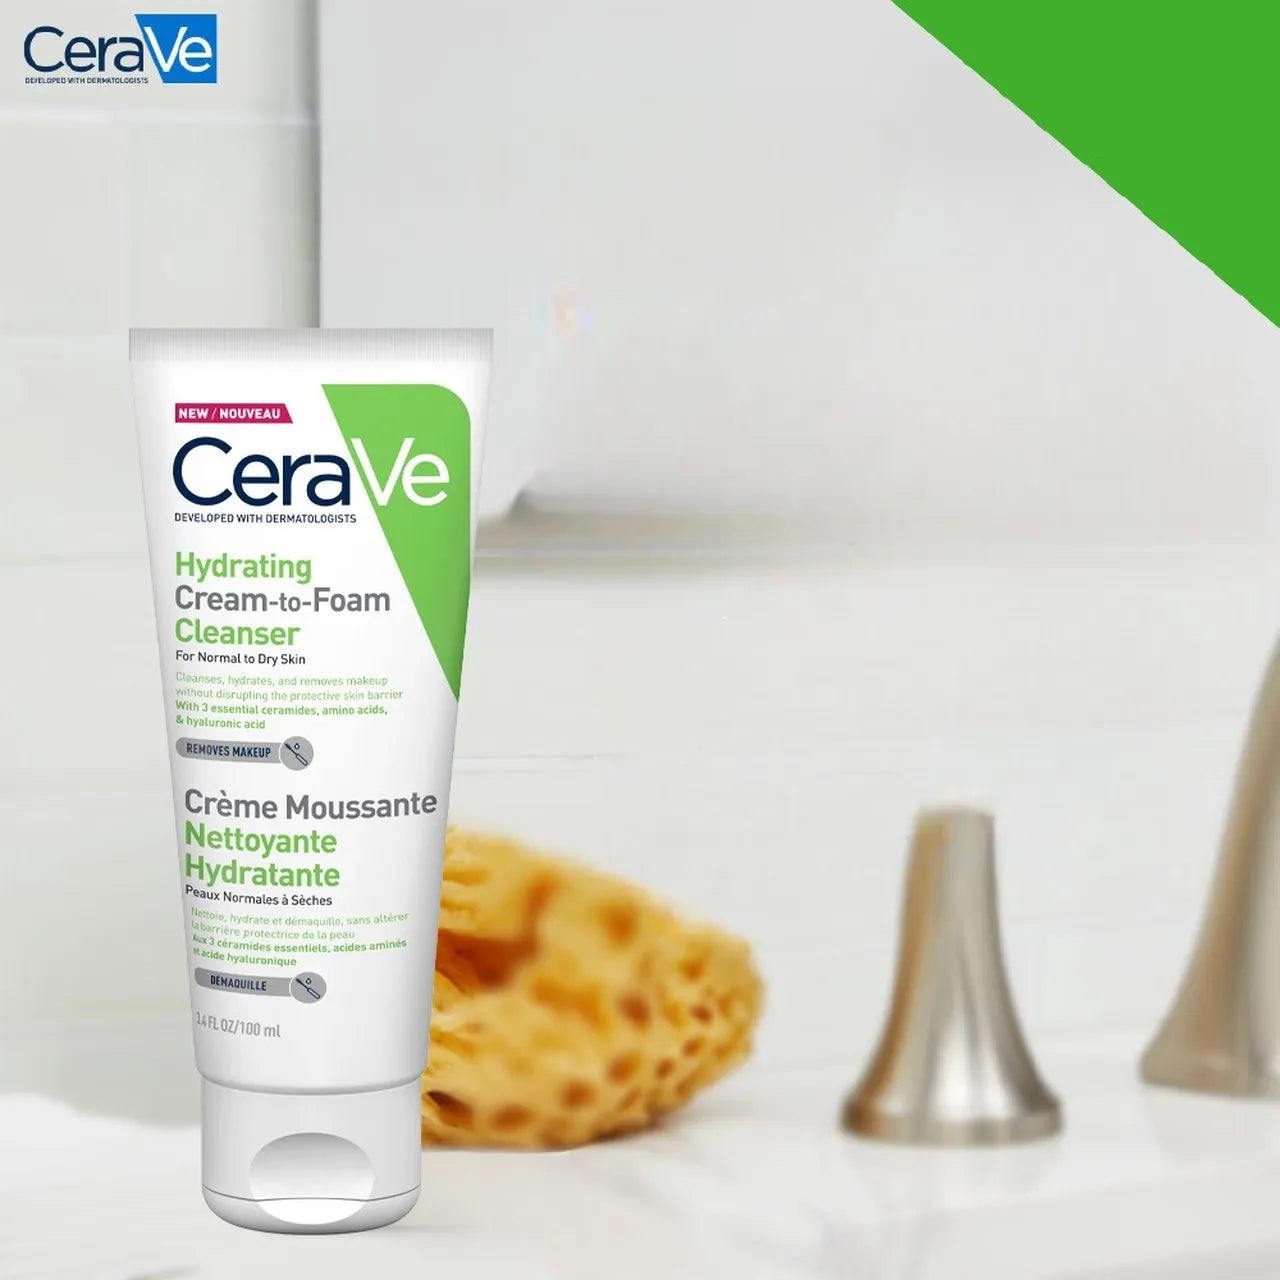 This dermatologist-developed cleanser removes dirt, oil, and makeup without stripping moisture, revealing hydrated, silky skin.